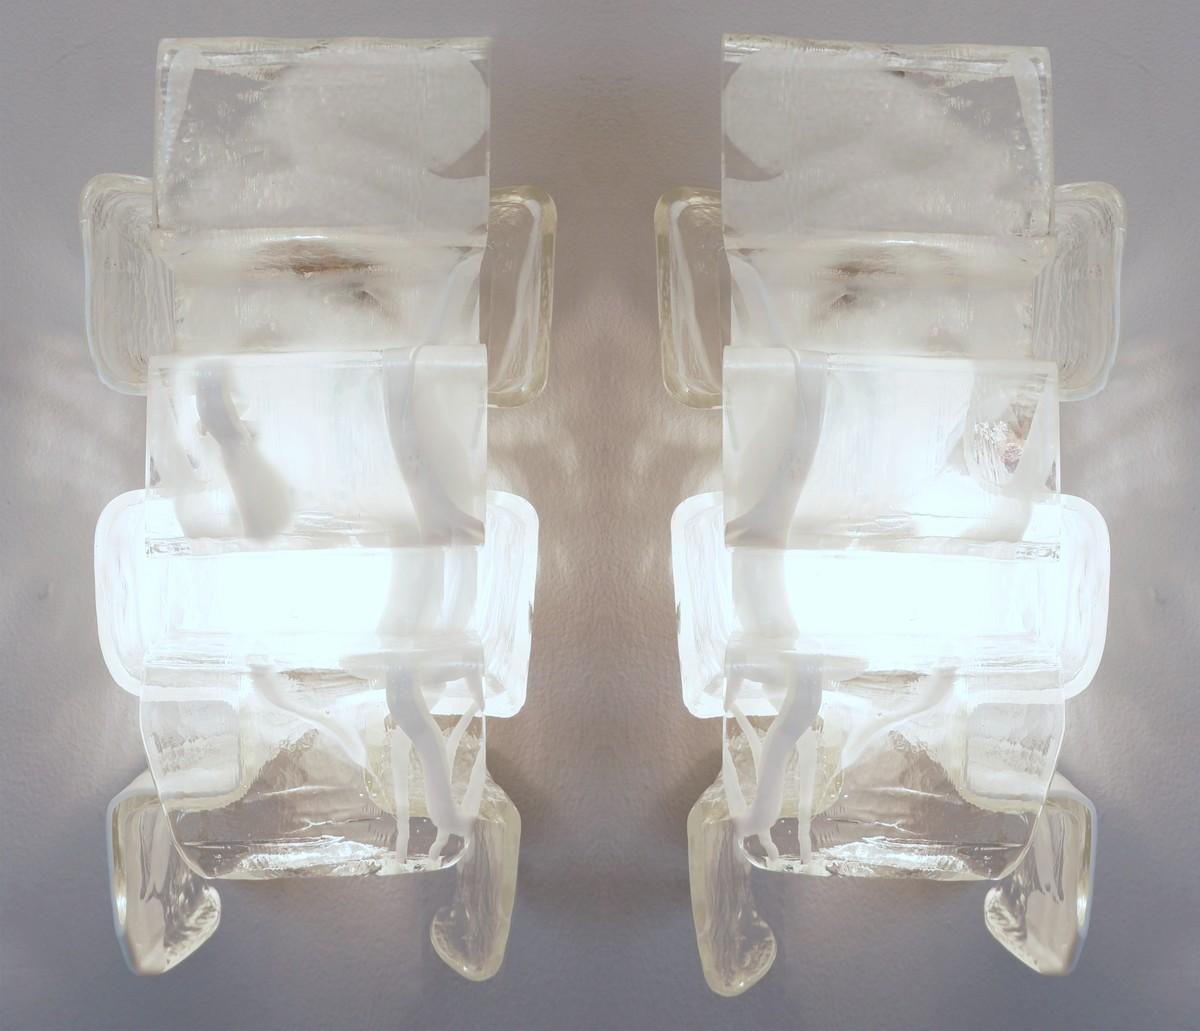 Pair of 1970s Murano glass sconces from Mazzega, Italy.